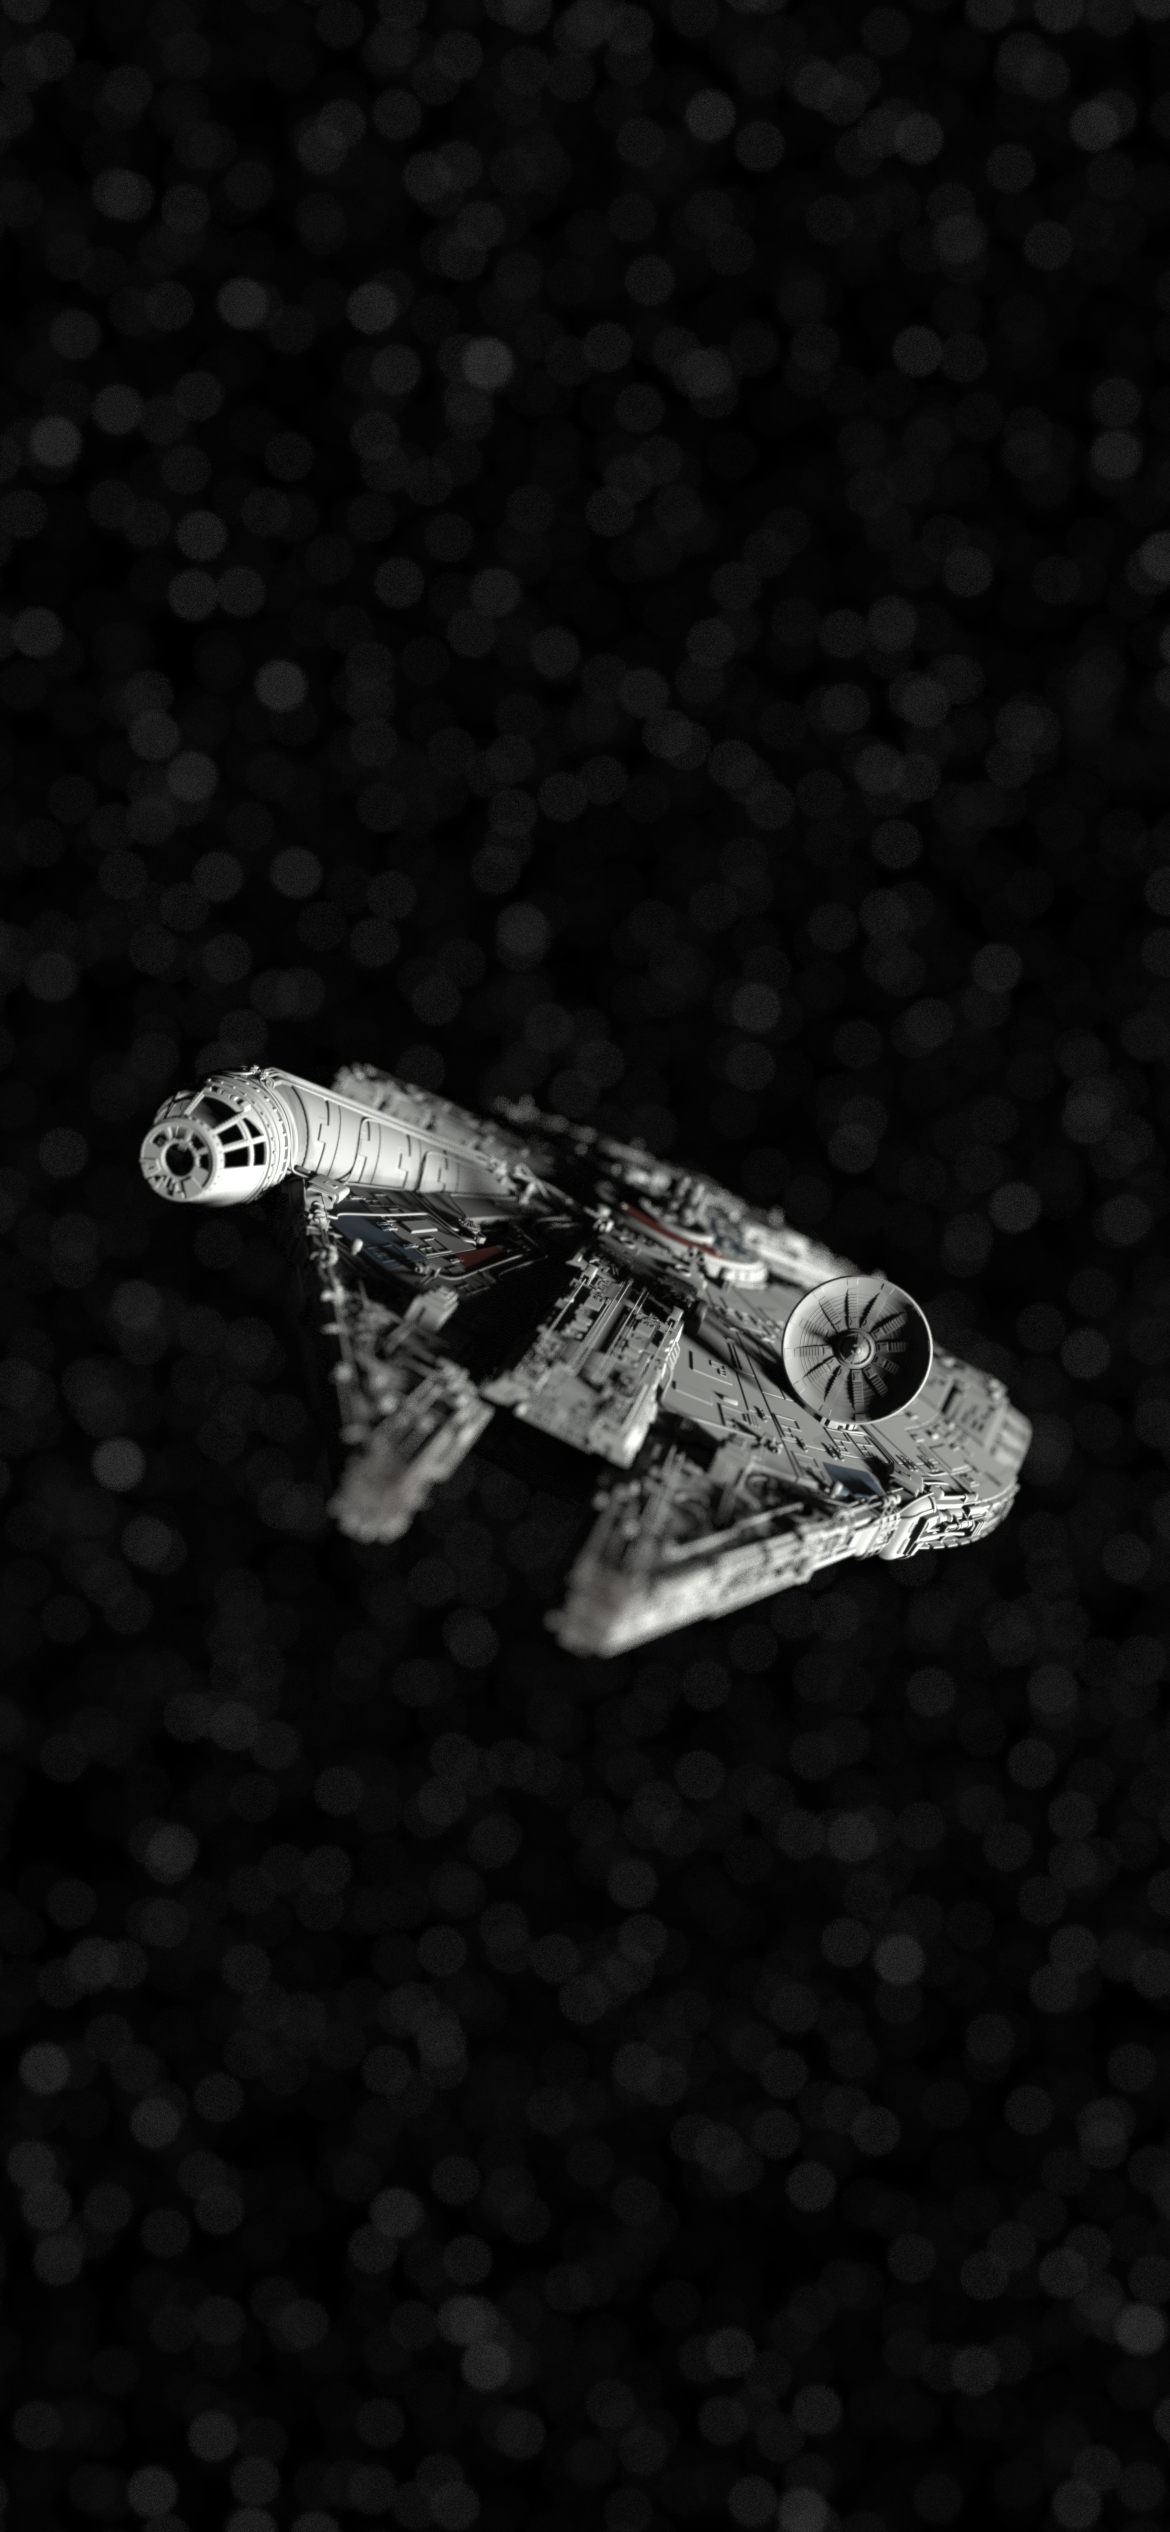 I rendered out a Millennium Falcon iPhone wallpaper for May 4th. Hope people like it!